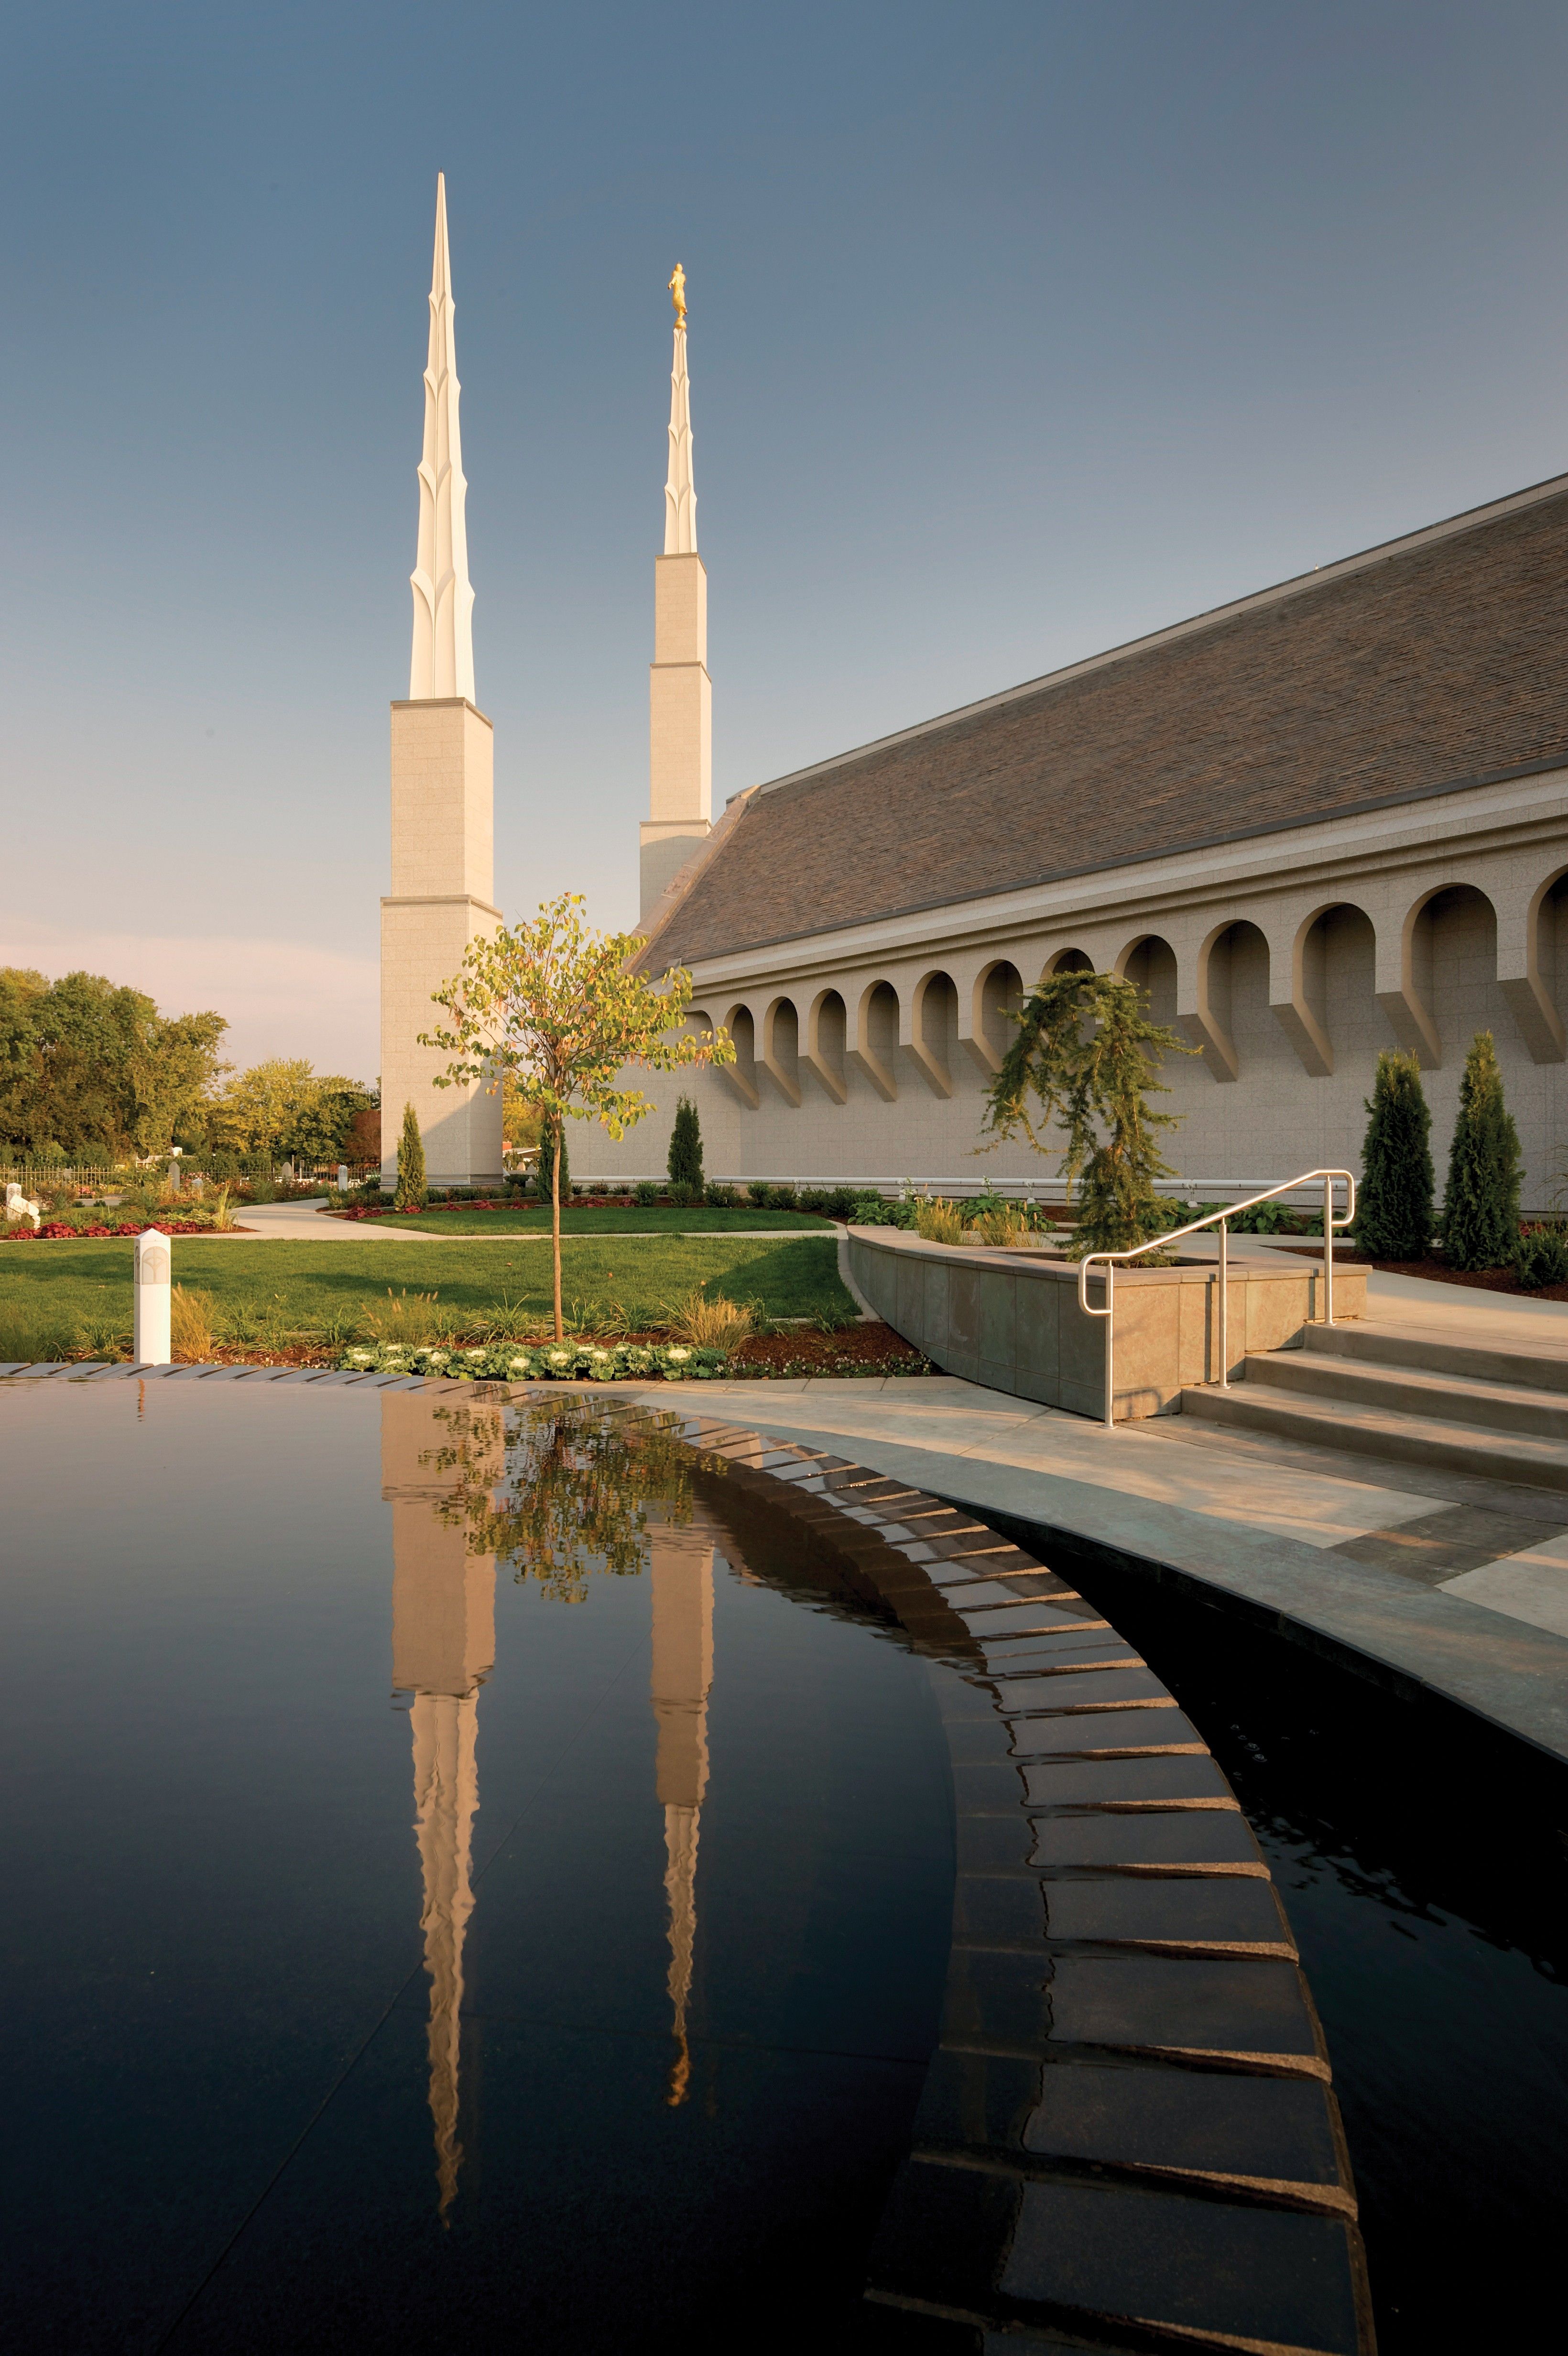 A side view of the Boise Idaho Temple reflected in the pond on the temple grounds.